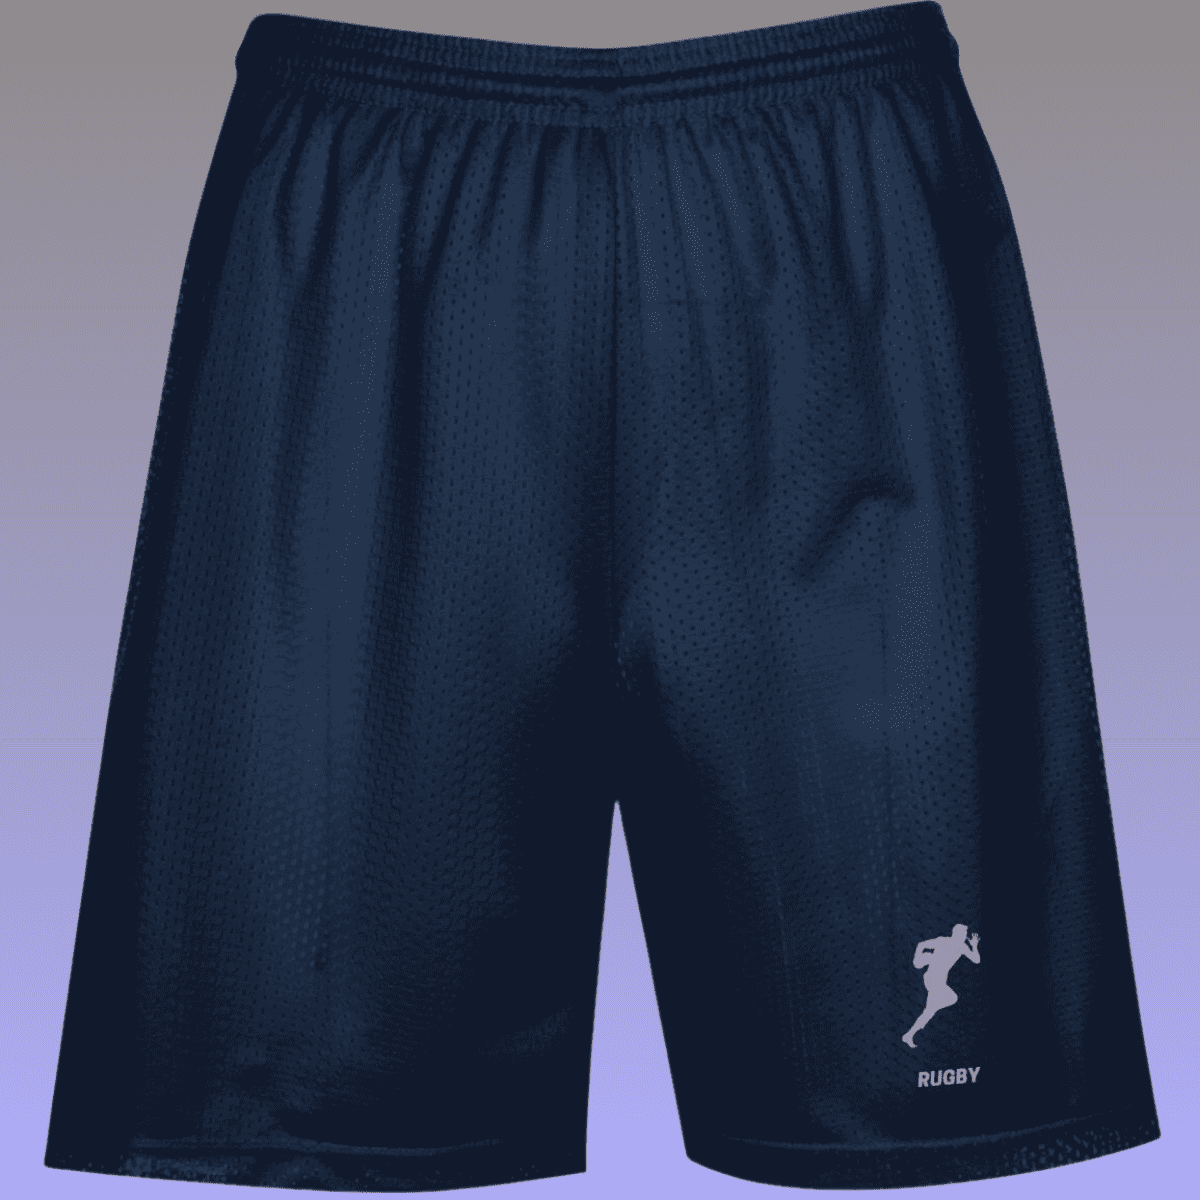 Men's Navy Rugby Performance Mesh Shorts